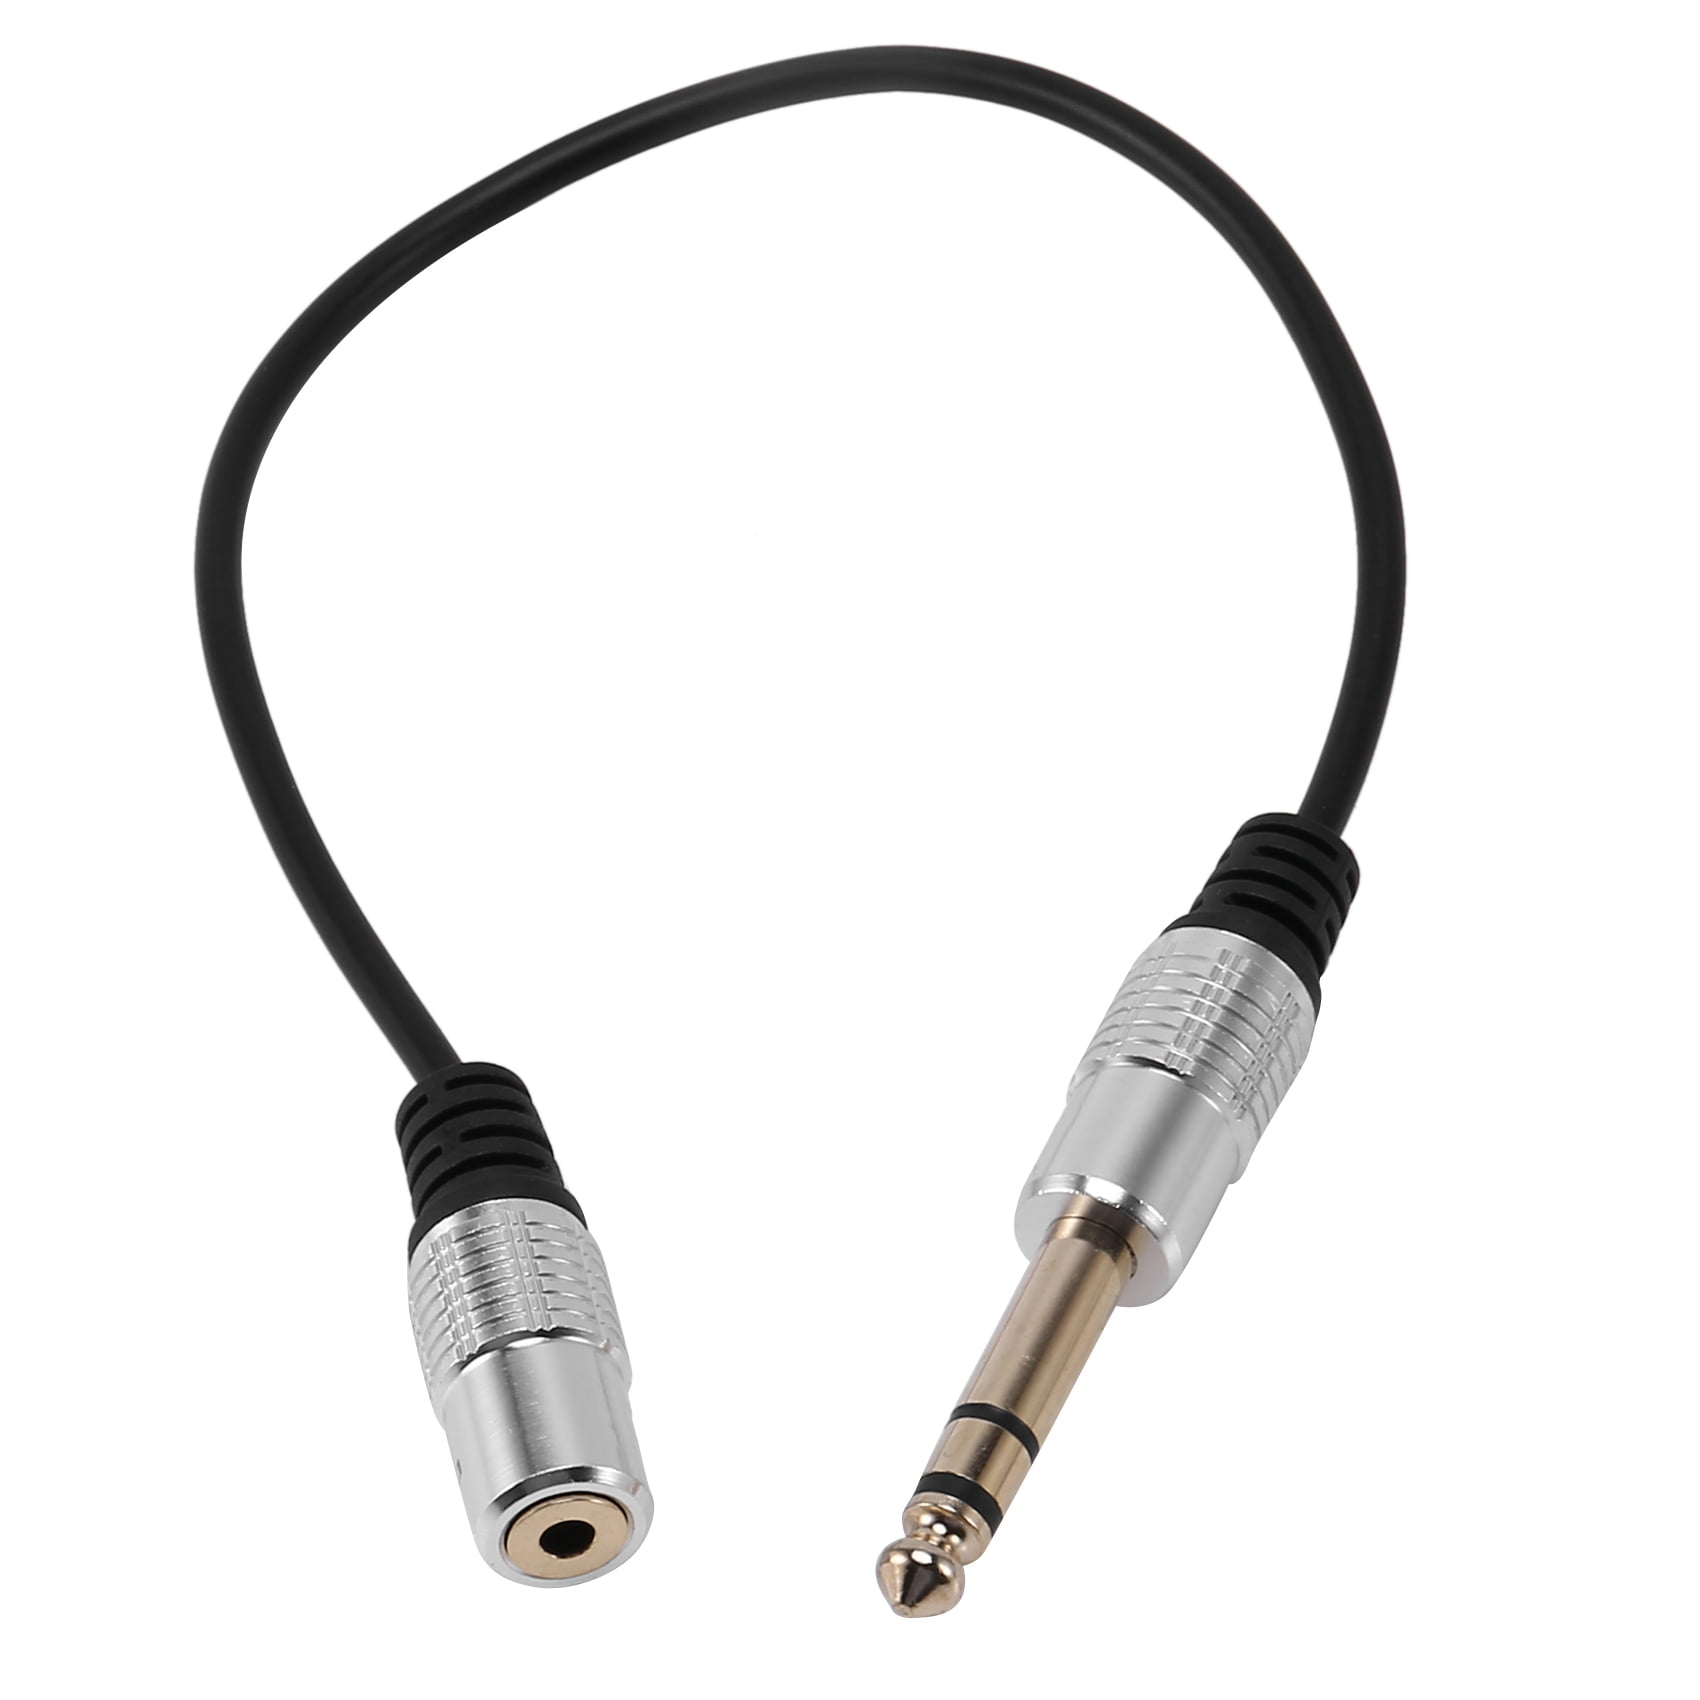 TRS Mini-plug 6.3mm to Male 1/8" 3.5mm SENNHEISER Cable Adapter Female 1/4" 